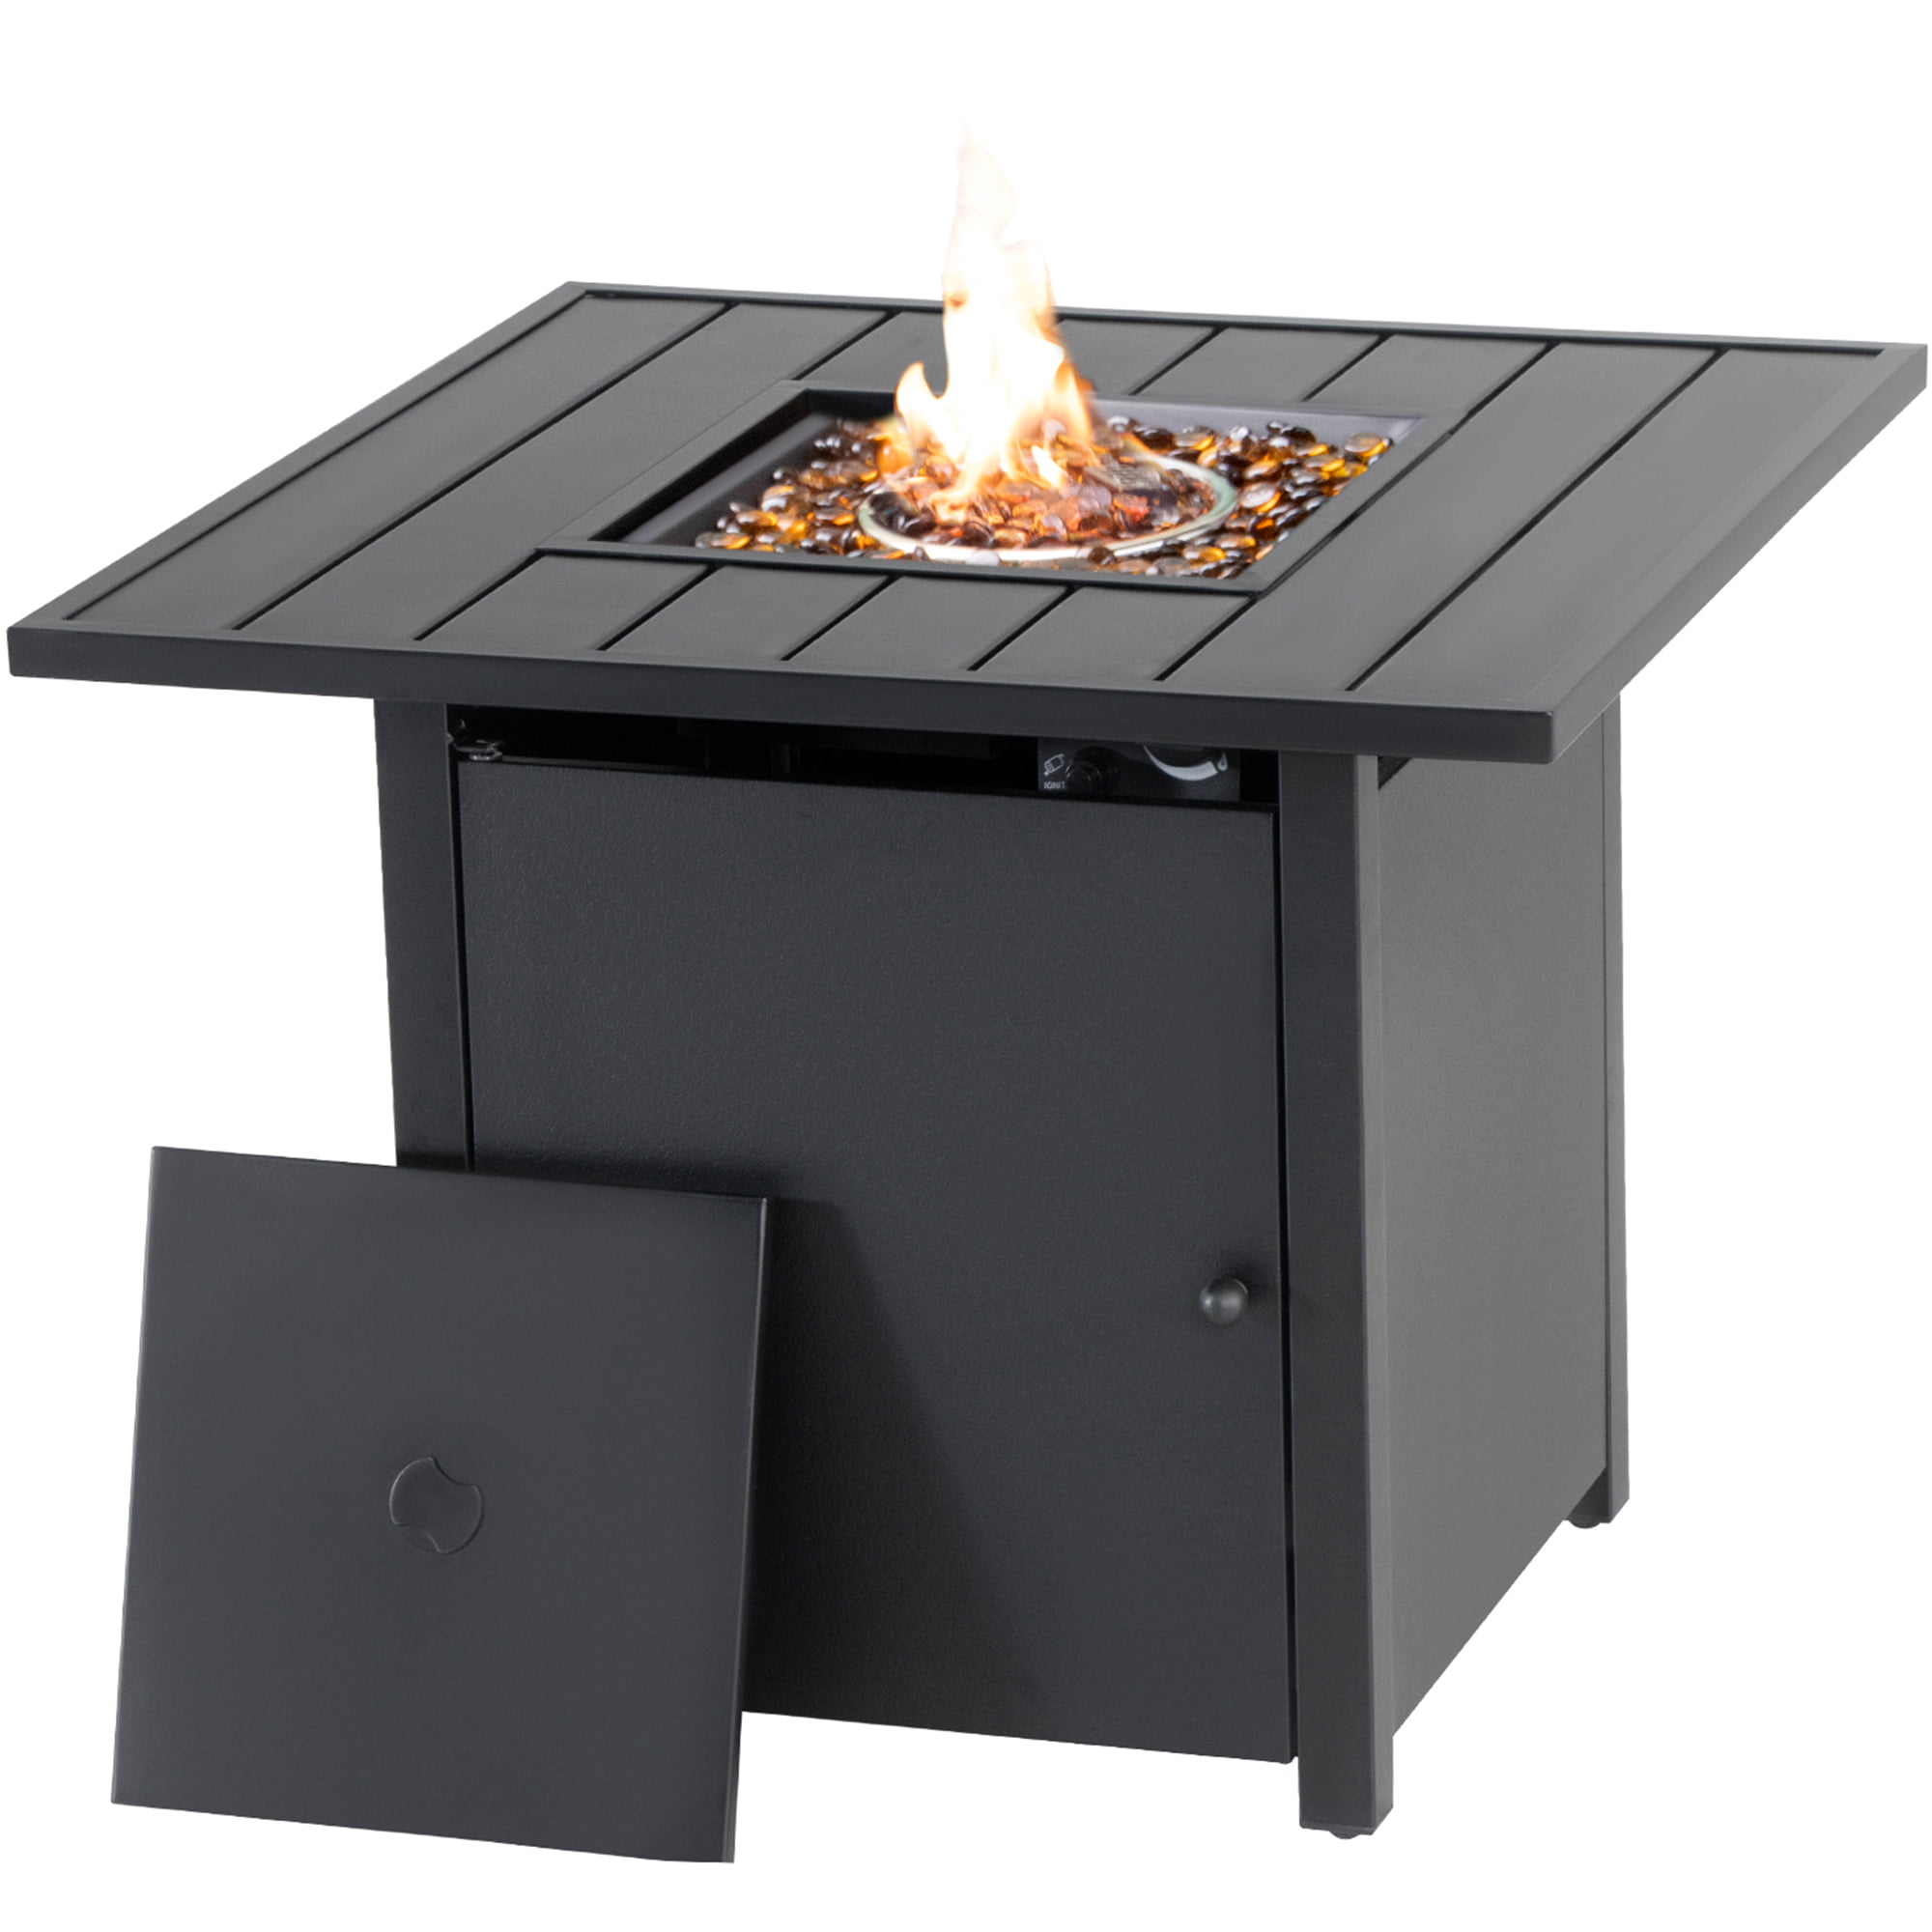 Camping,Courtyard,Deck Garden 31Inch Gas Propane Fire Pit,40000BTU Outdoor Auto-Ignition Rectangular Fire Table,CSA Certification Patio Table with Lid for Backyard Square-31inch